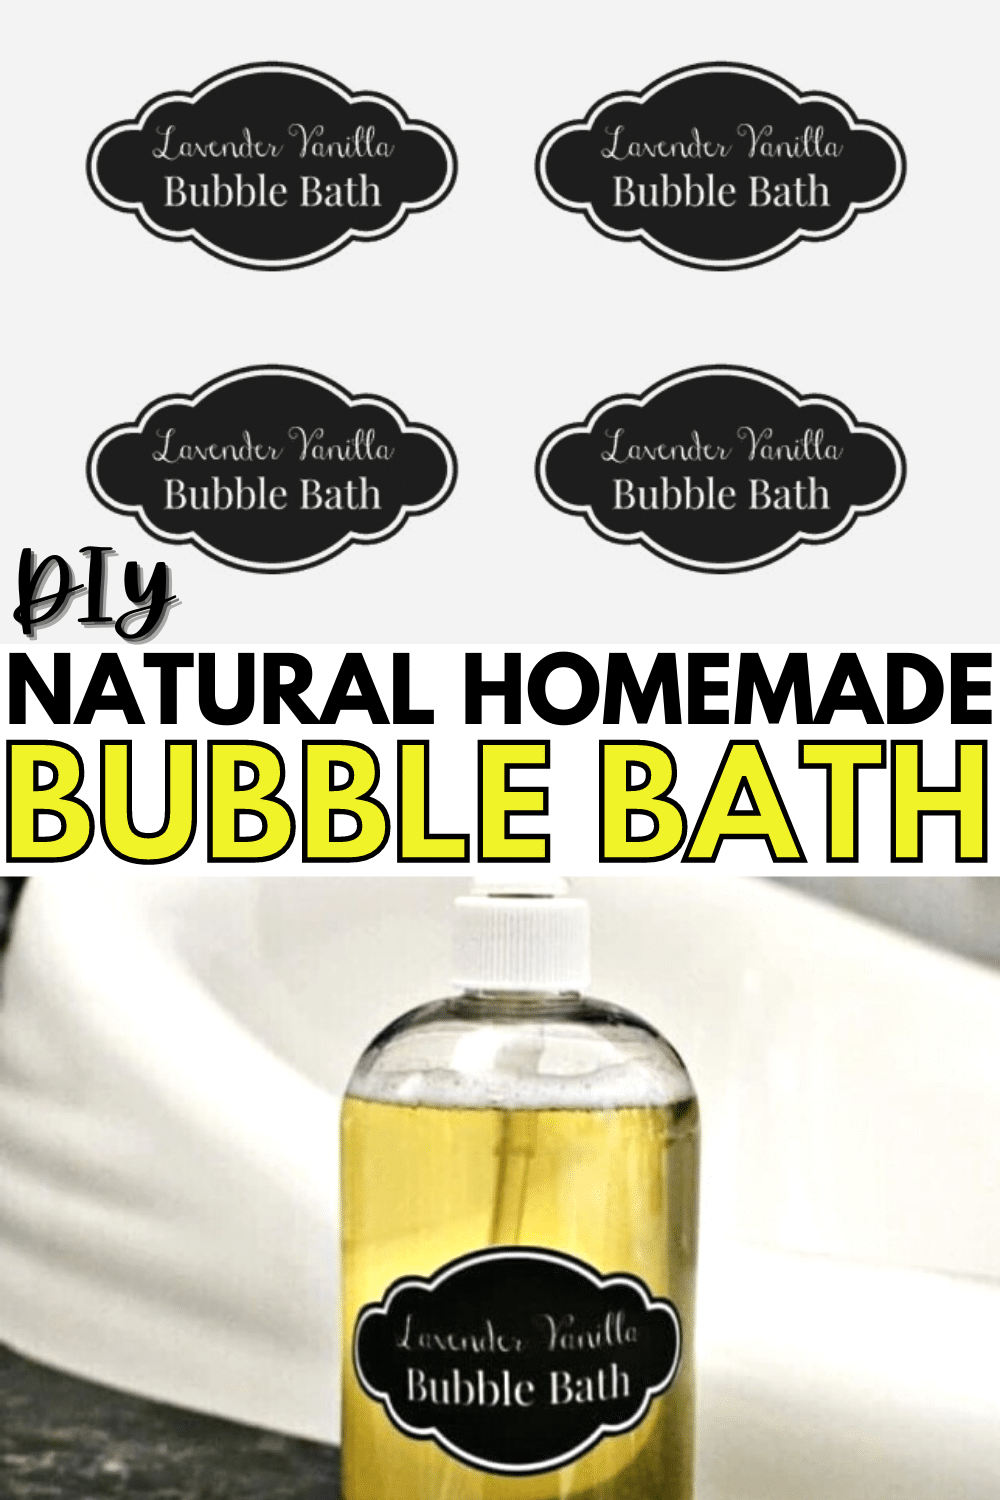 Are you trying to eliminate products with harsh chemicals from your home? Here's a super simple recipe for a lavender vanilla natural homemade bubble bath. #homemade #natural #lavendervanilla #bubblebath via @wondermomwannab